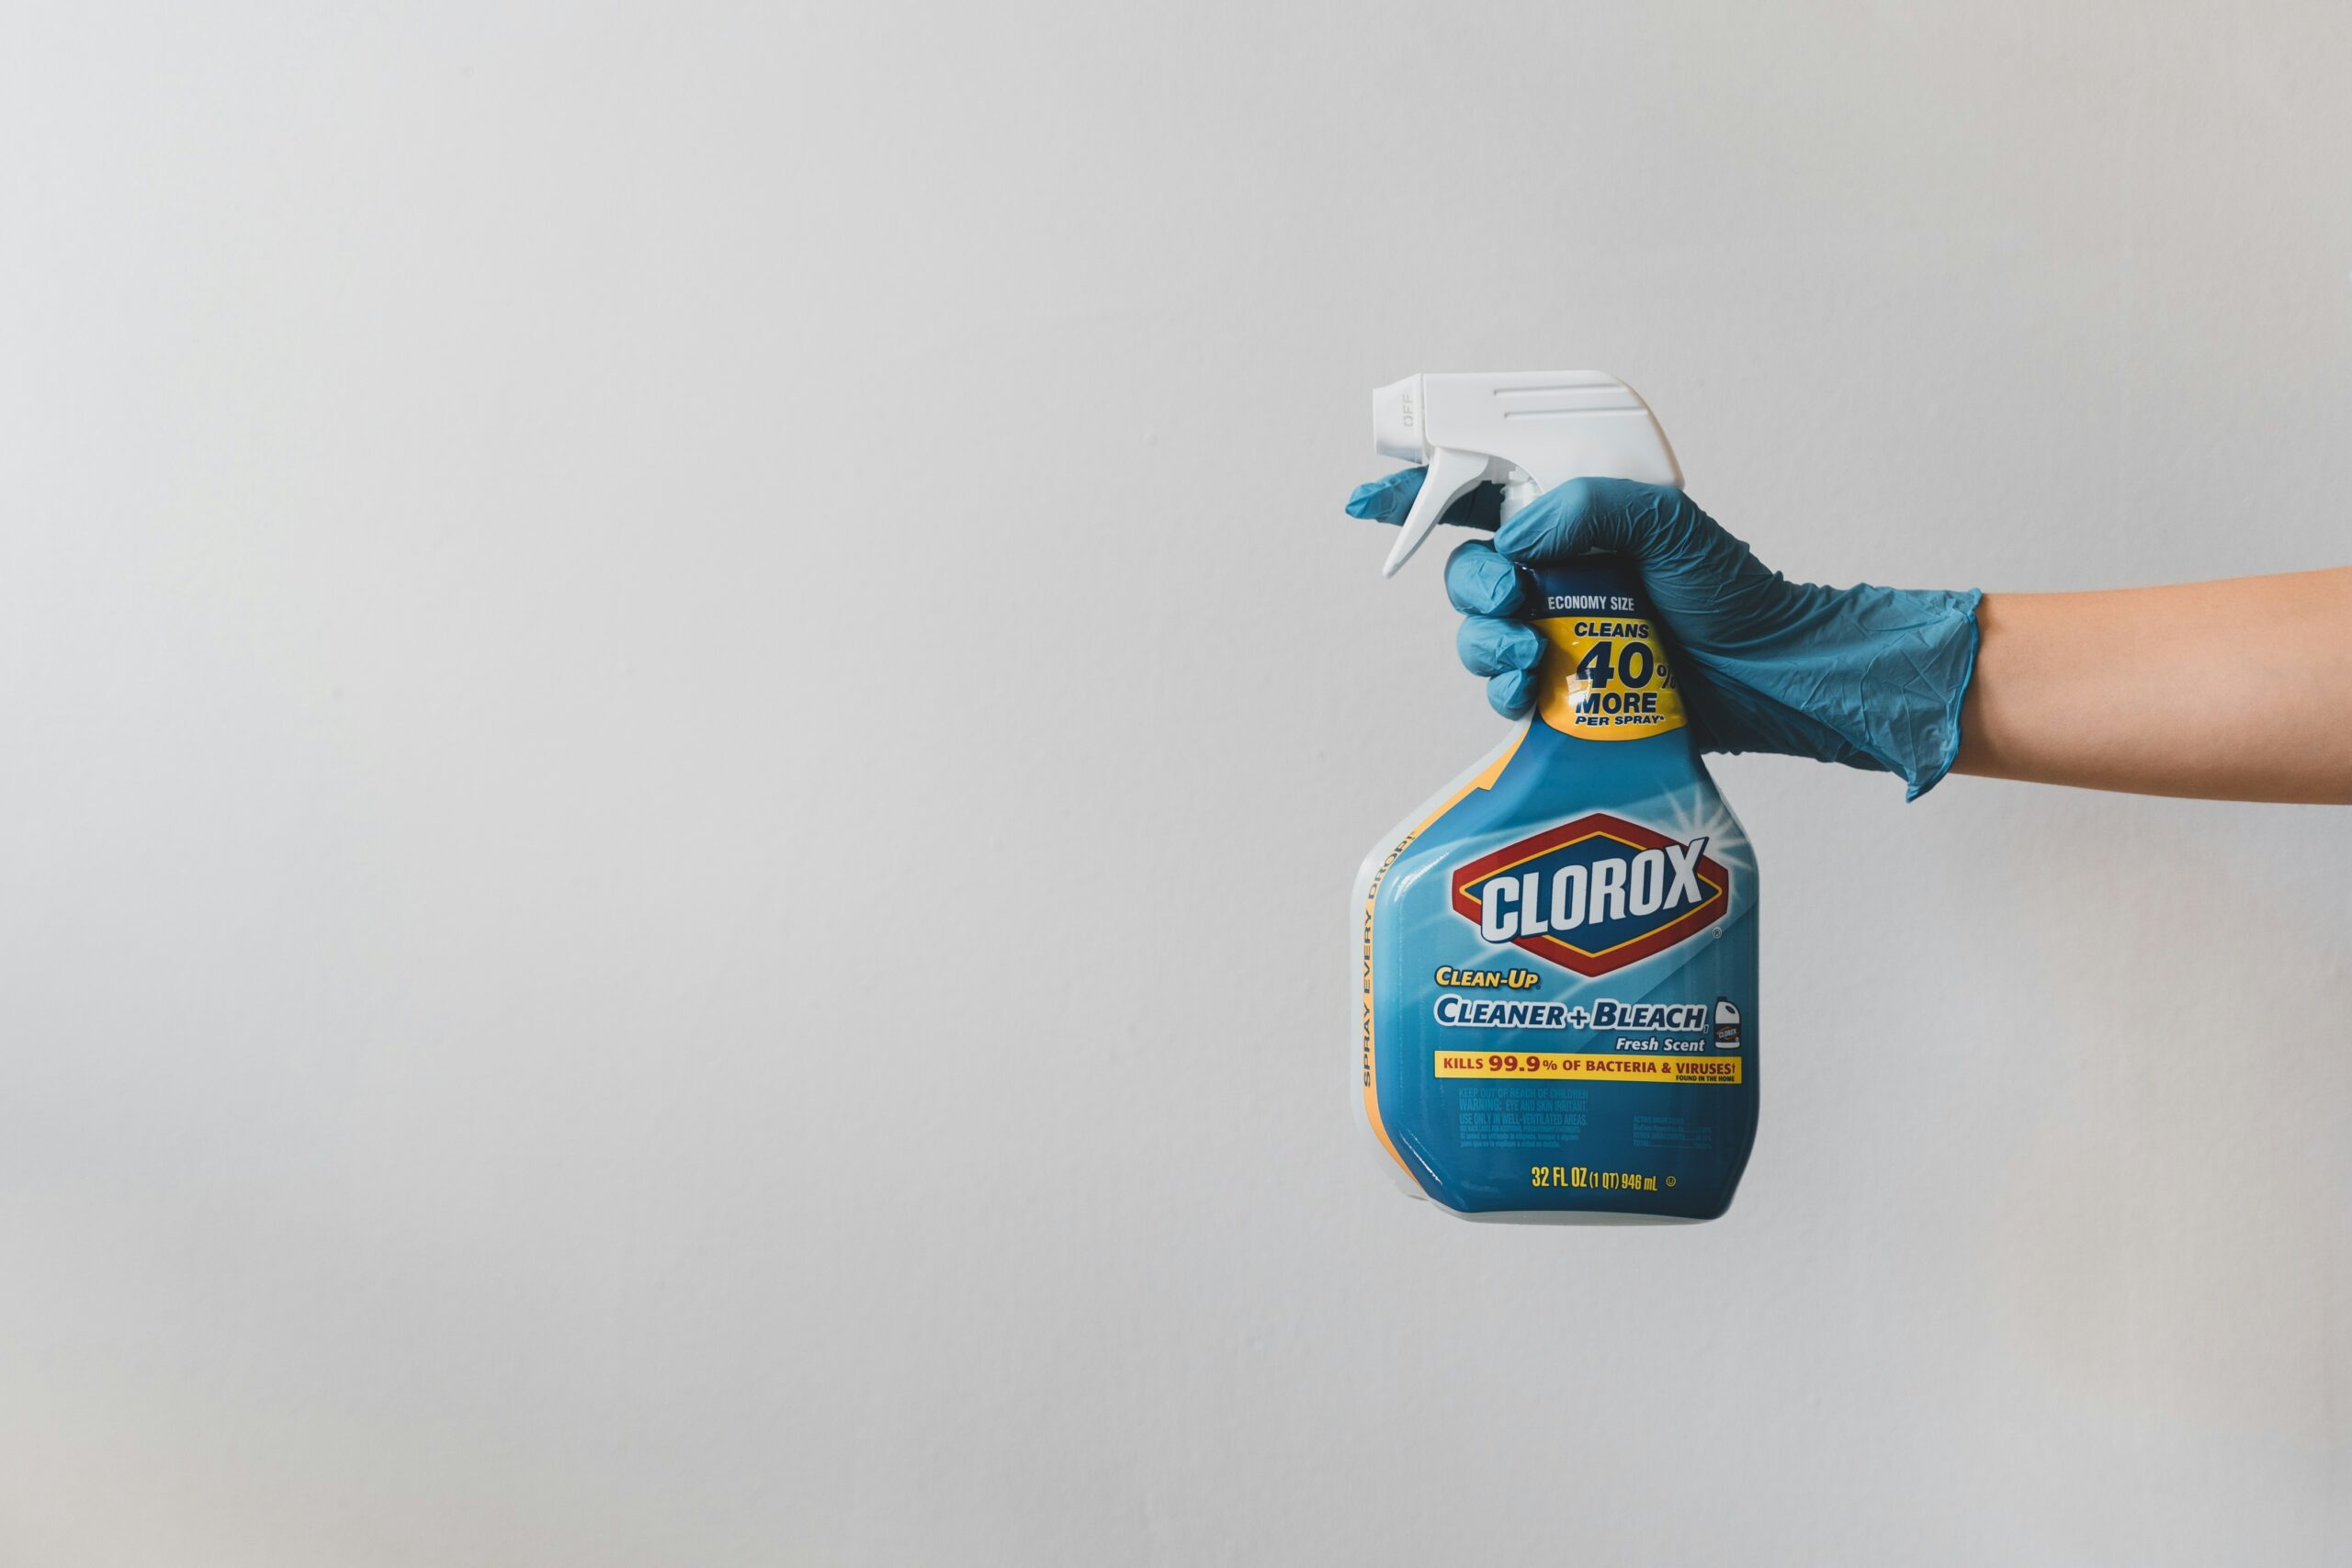 Can you mix bleach and vinegar together? Here's why these two household chemicals should never be combined. Pictured: A bottle of bleach cleaner